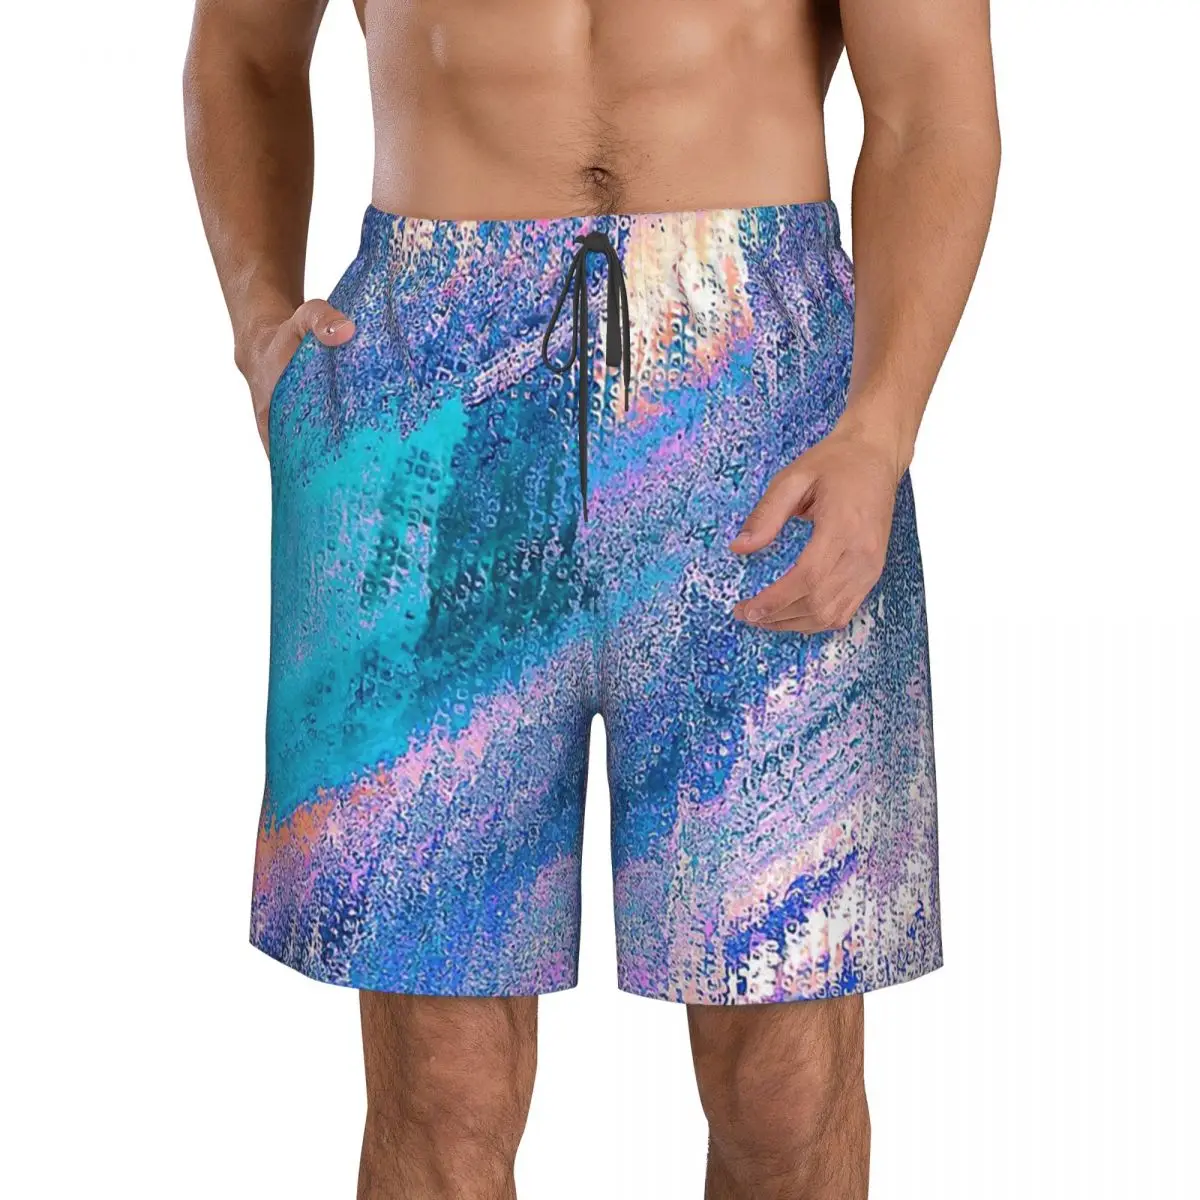 

Impressionism Art Men's Swimming Trunks Blue Watercolor Effect Beach Shorts Quick Dry Male Surfing Boardshorts